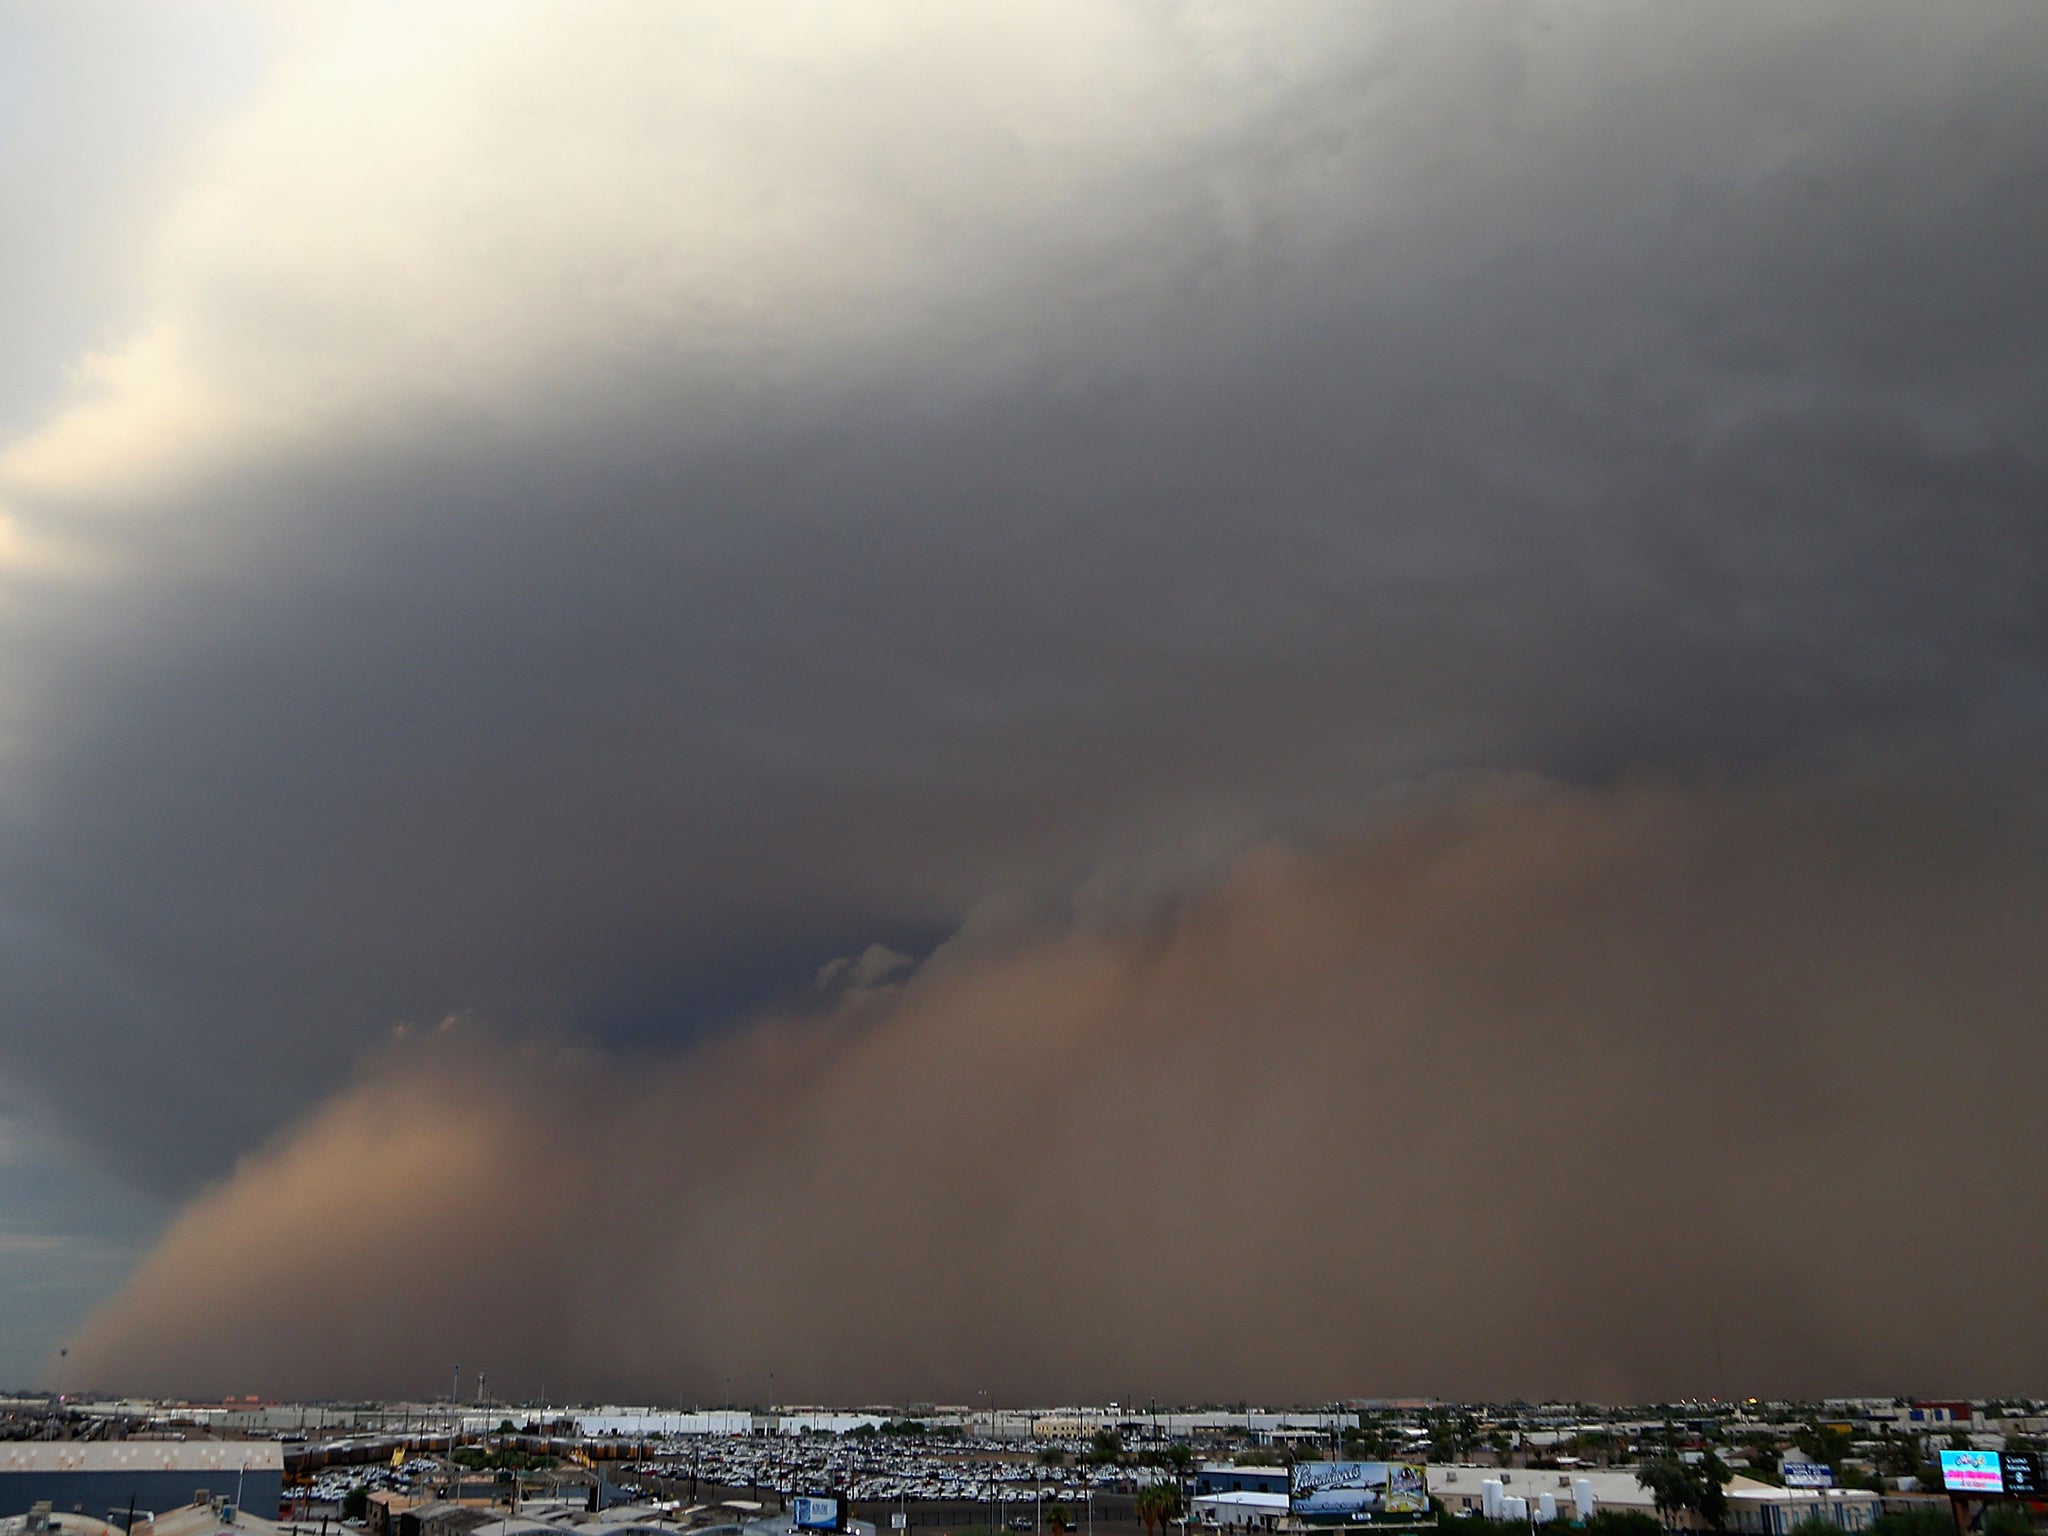 File: A dust storm approaches. Strong southerly winds at high altitudes can transport Saharan dust to the UK